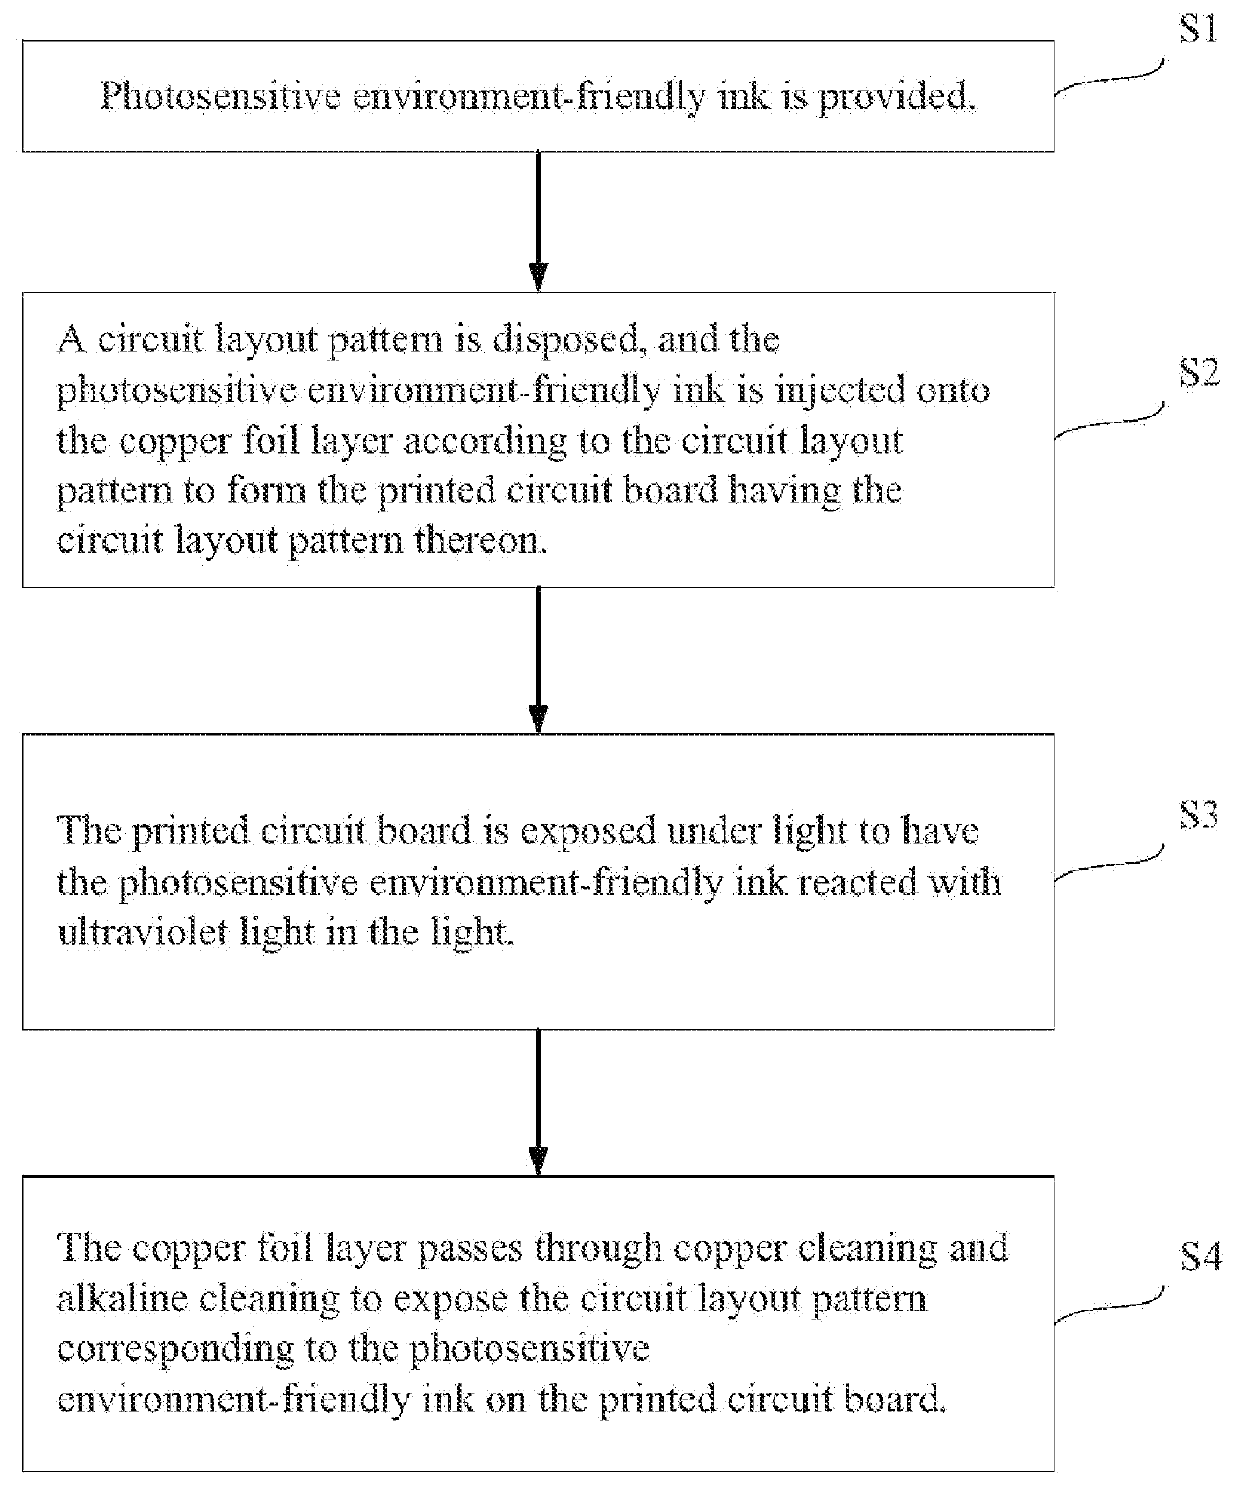 Method of circuit layout by photosensitive environment-friendly ink